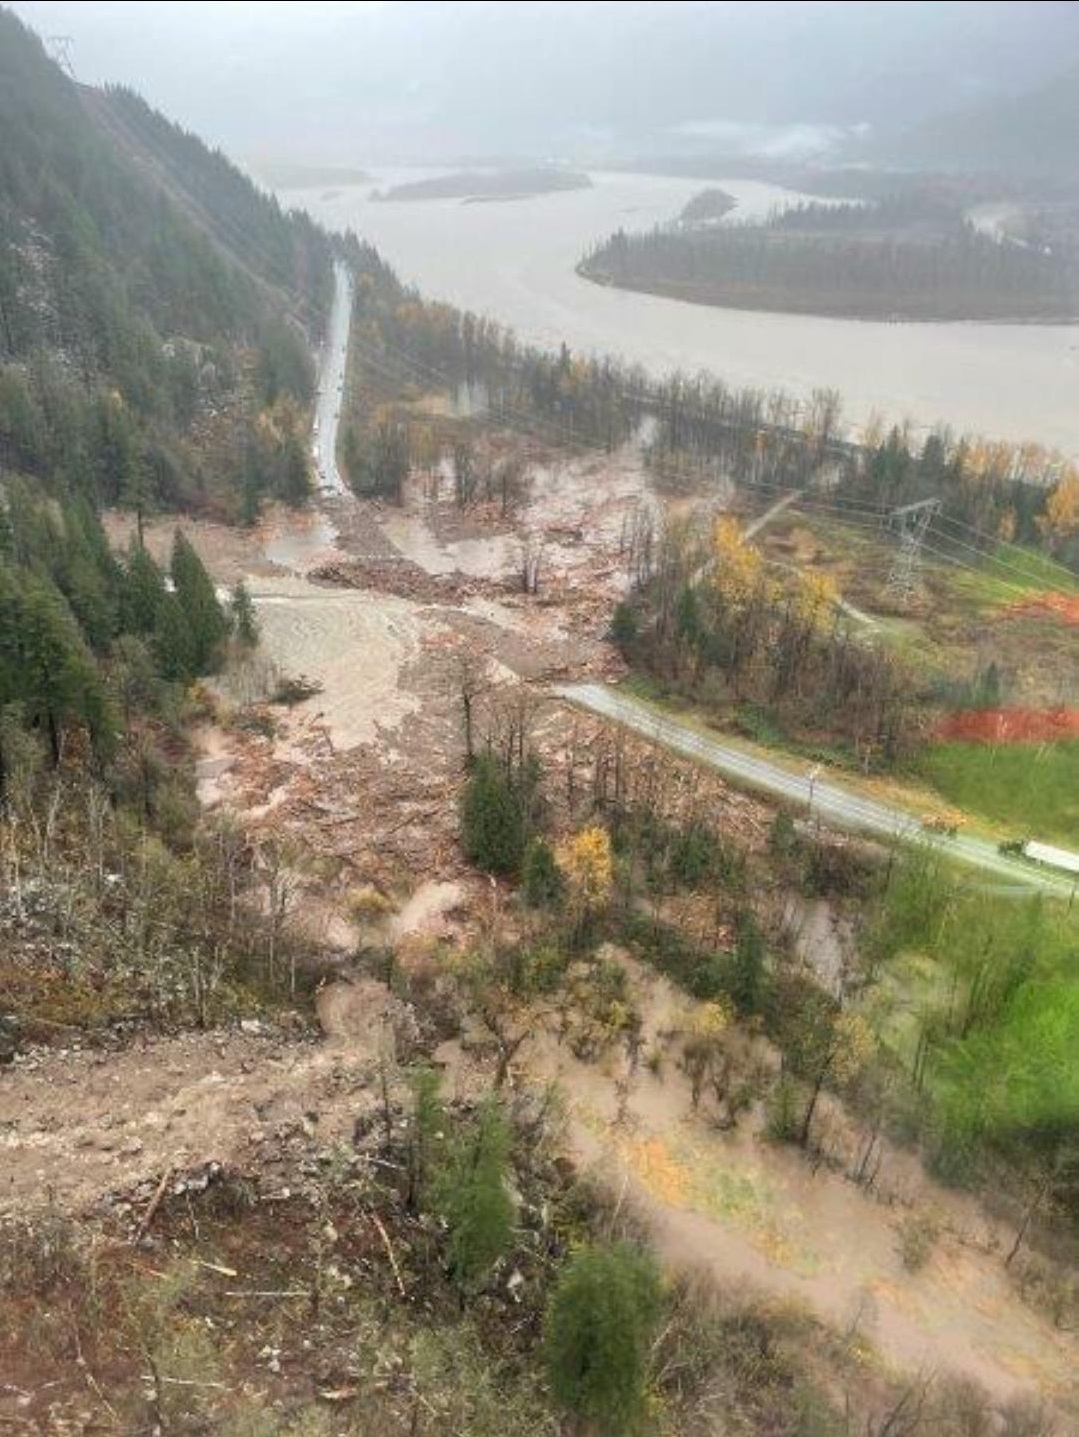 A landslide on Highway 1 between Agassiz and Hope in British Columbia. 